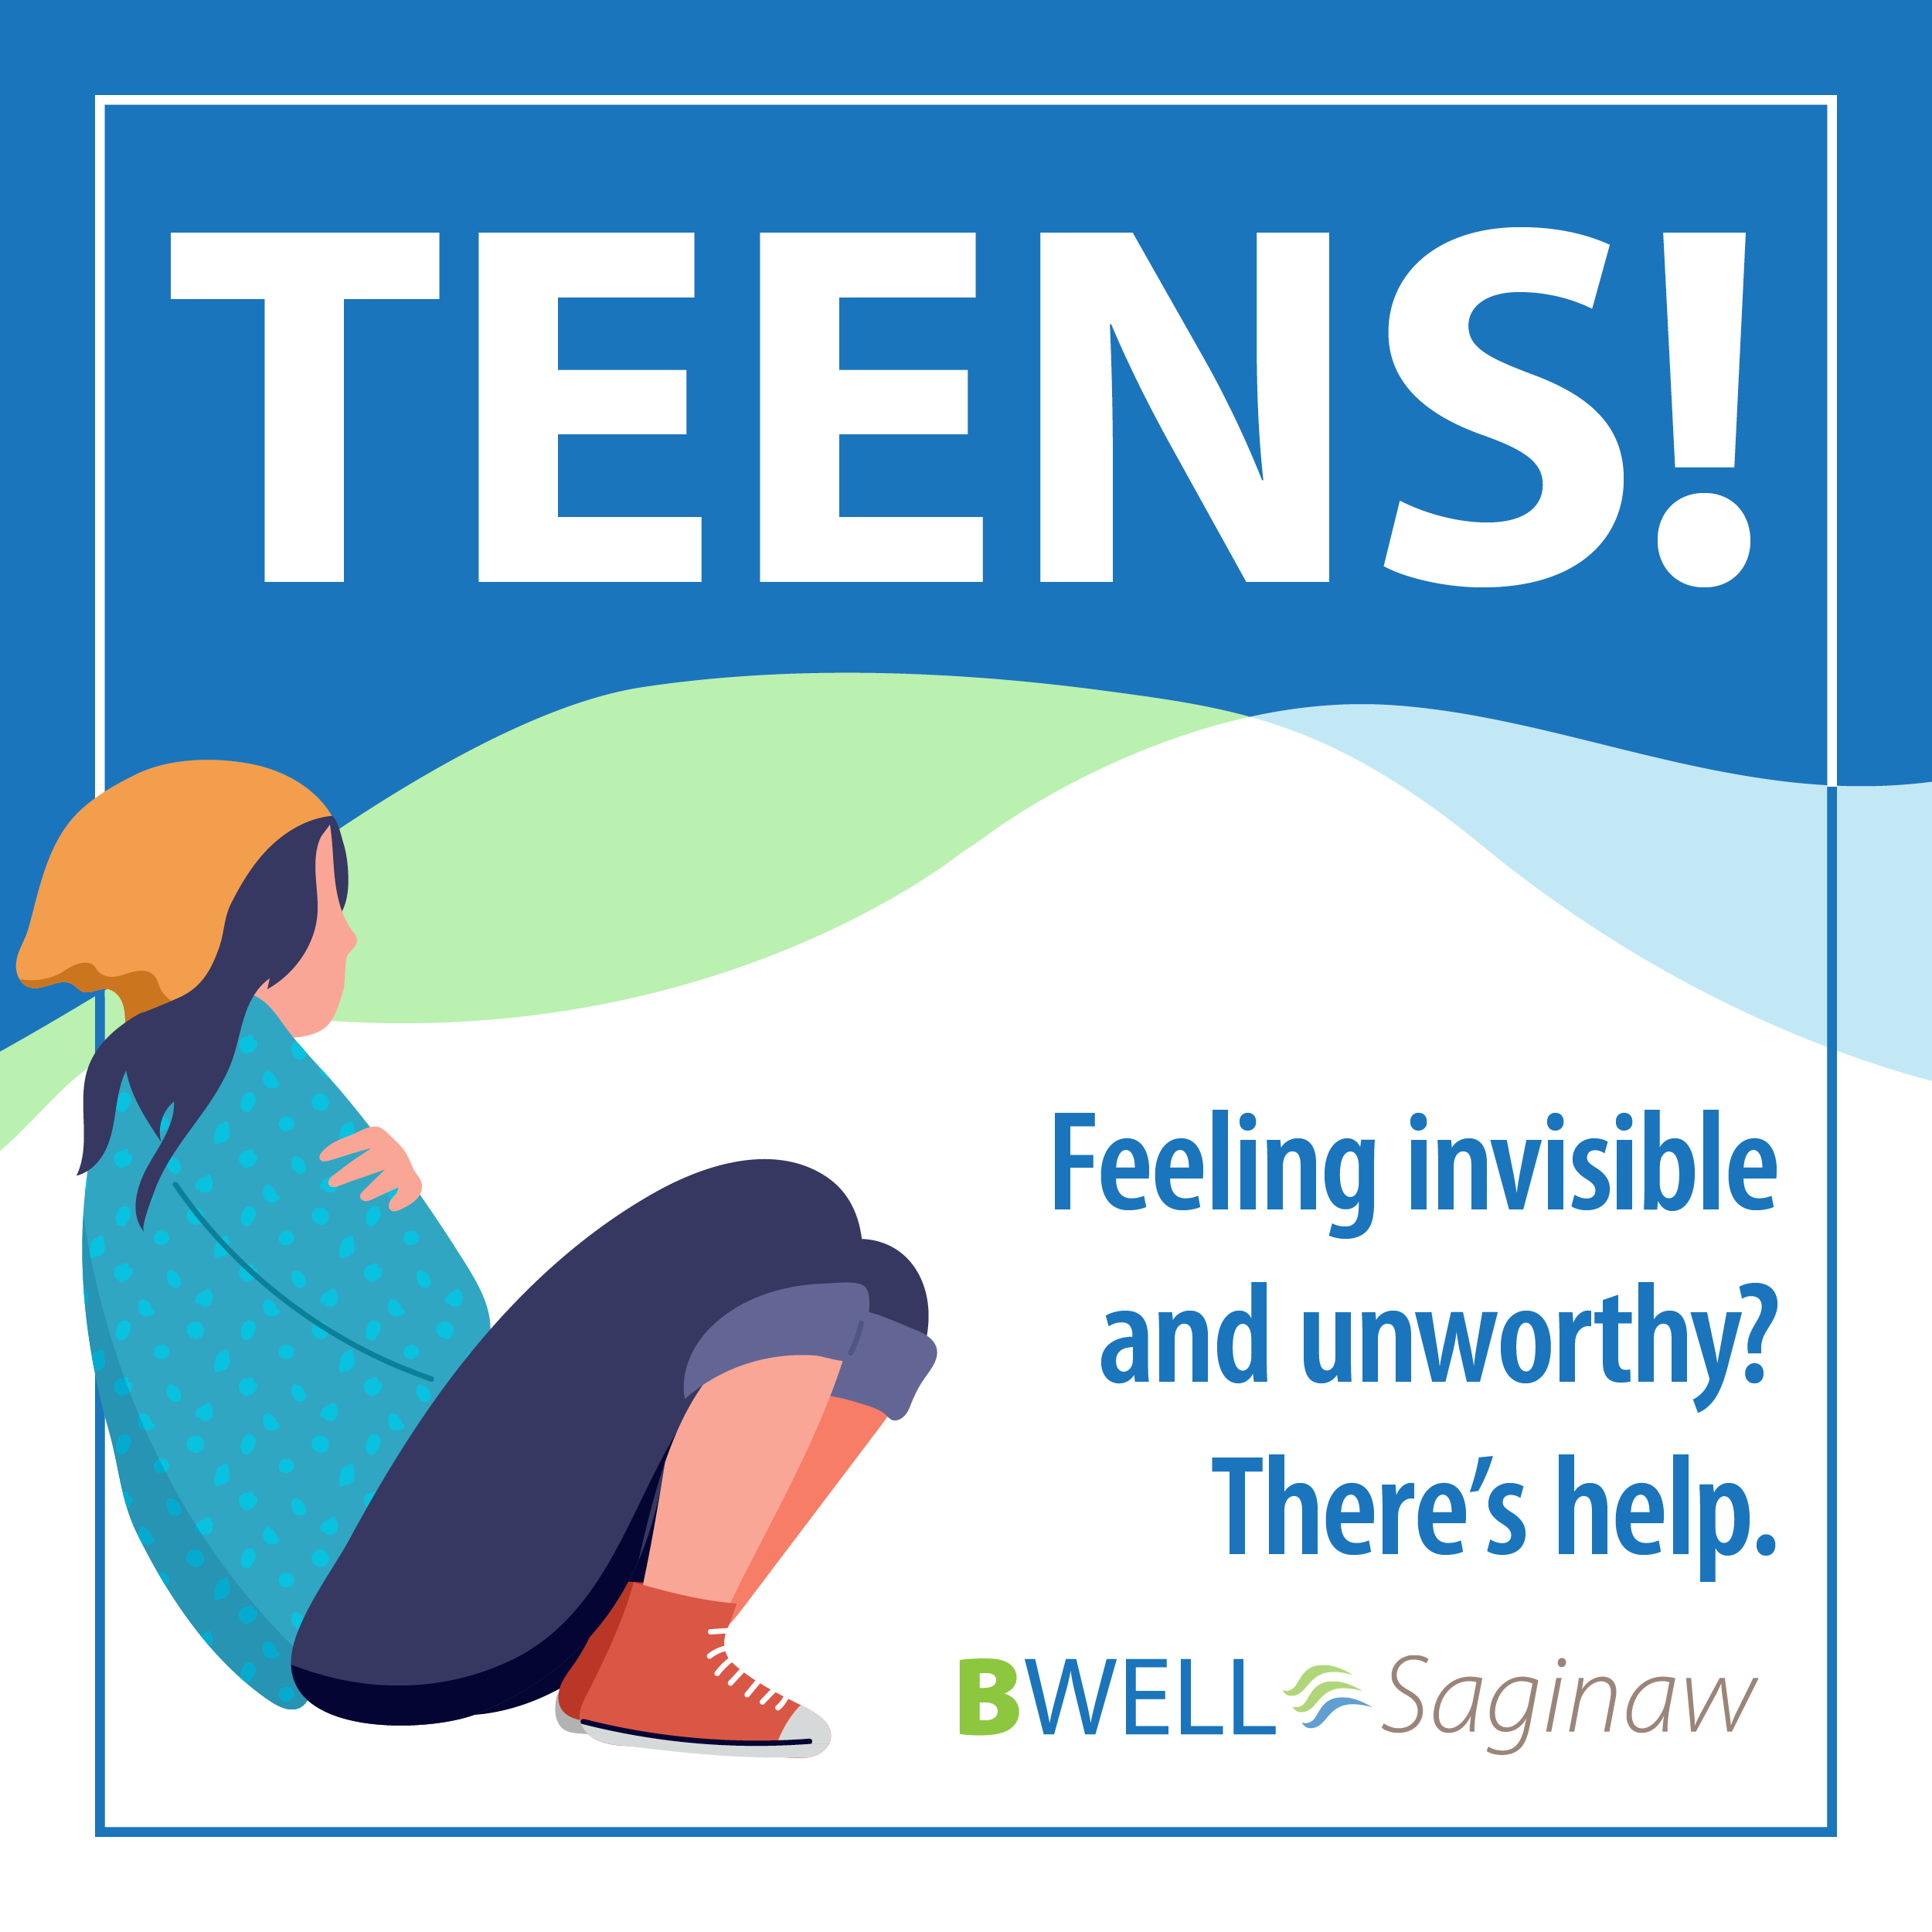 #3: Teens: Feeling invisible and unworthy?